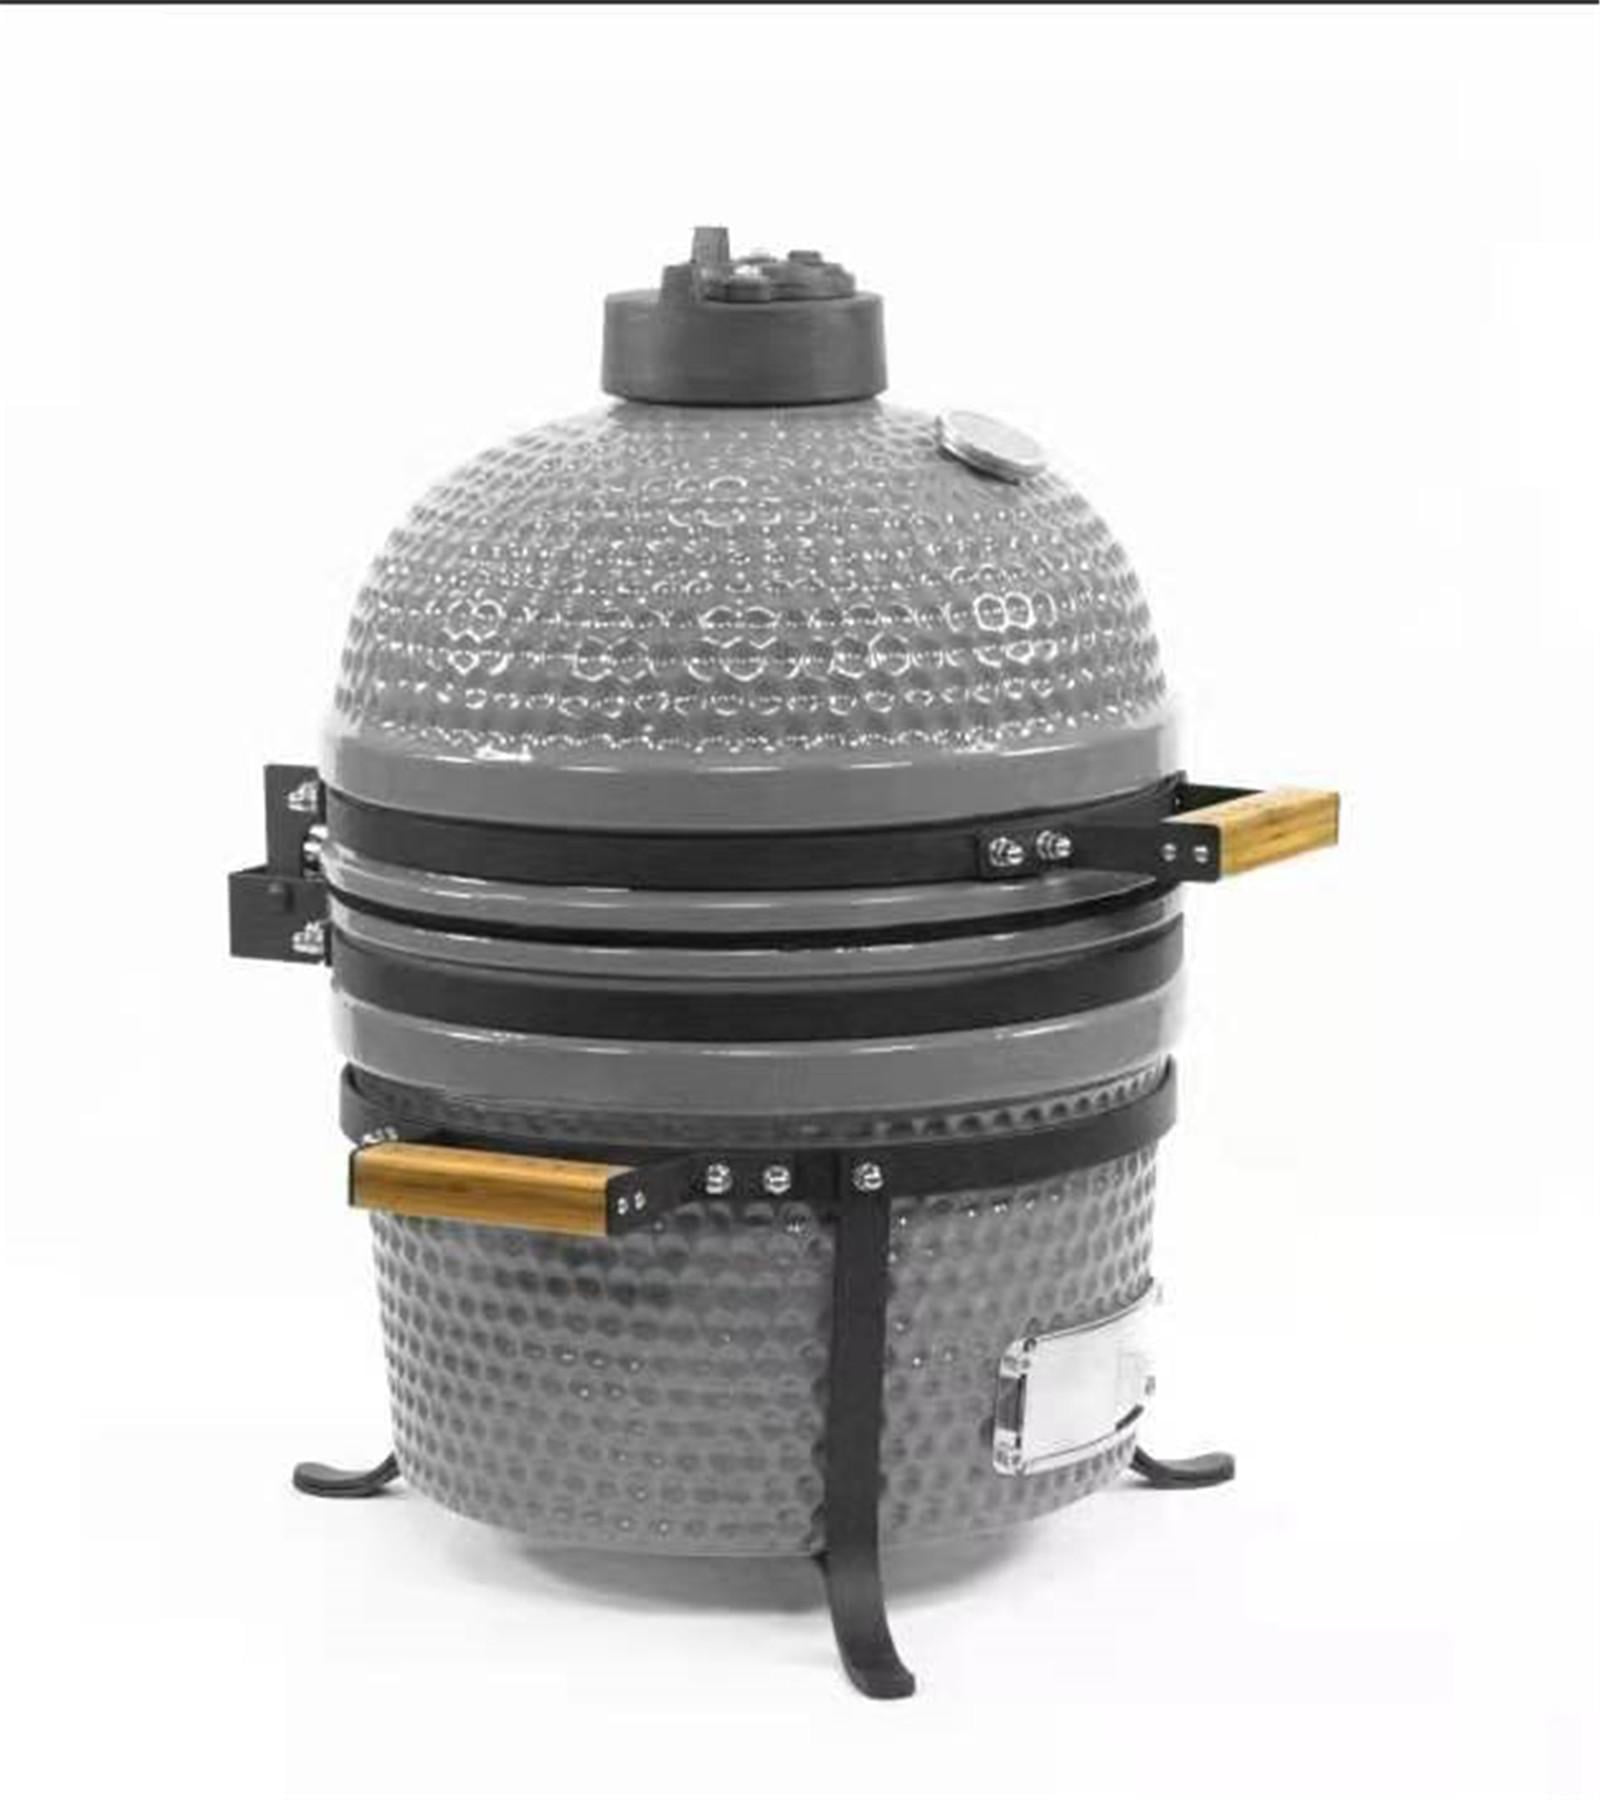 Fractie De schuld geven Ik geloof 15 Inch Mini Grill Garden Ceramic Grills BBQ Smoker without Side Table-GRAY  for Camping and Picnic, Backyard Patio Picnic Camping, Outdoor Mini Egg  Style - Walmart.com